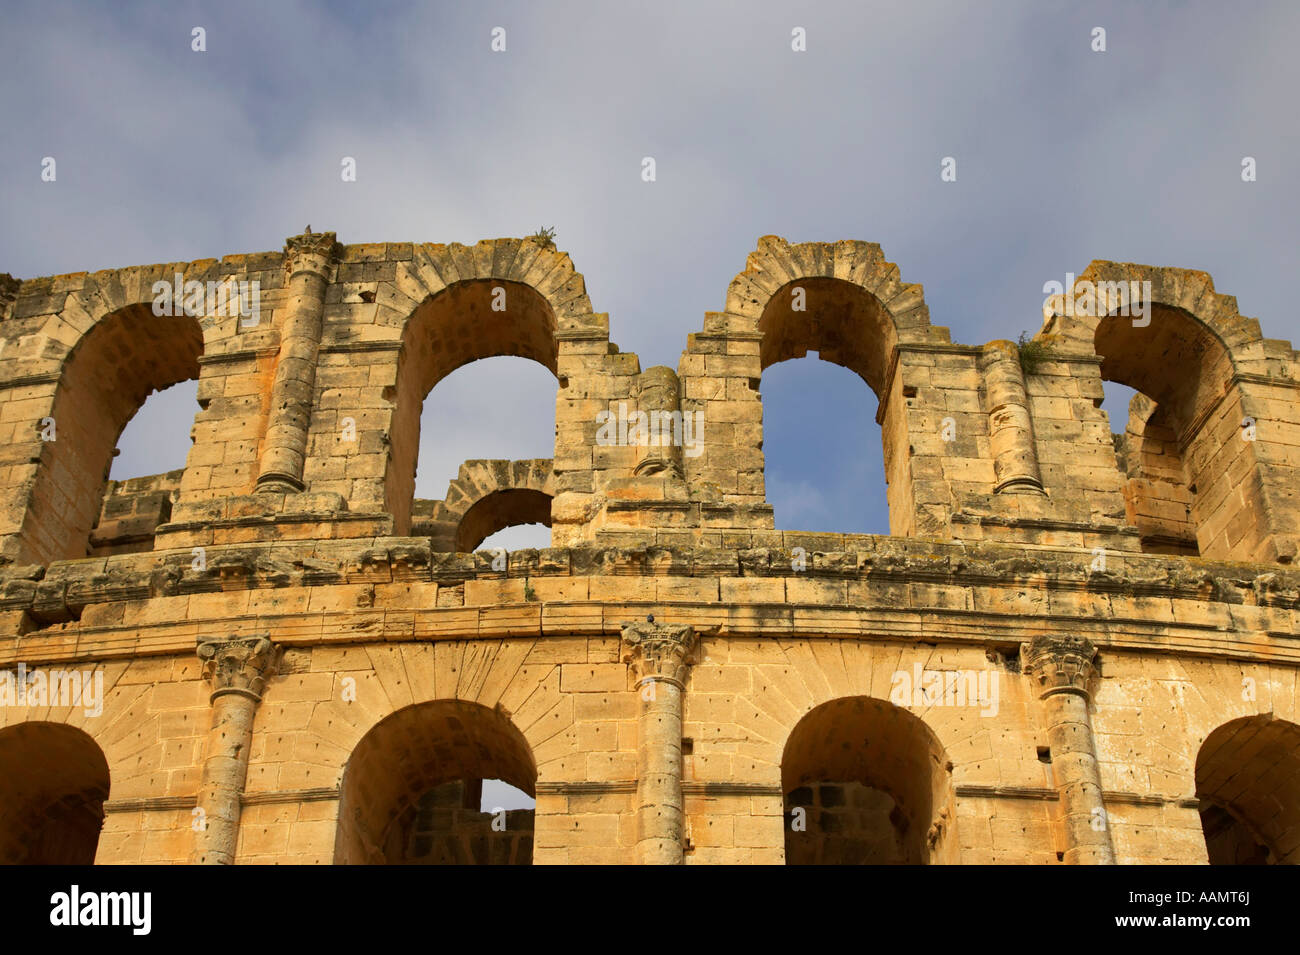 close up of the top of the old roman colloseum against blue cloudy sky el jem tunisia Stock Photo